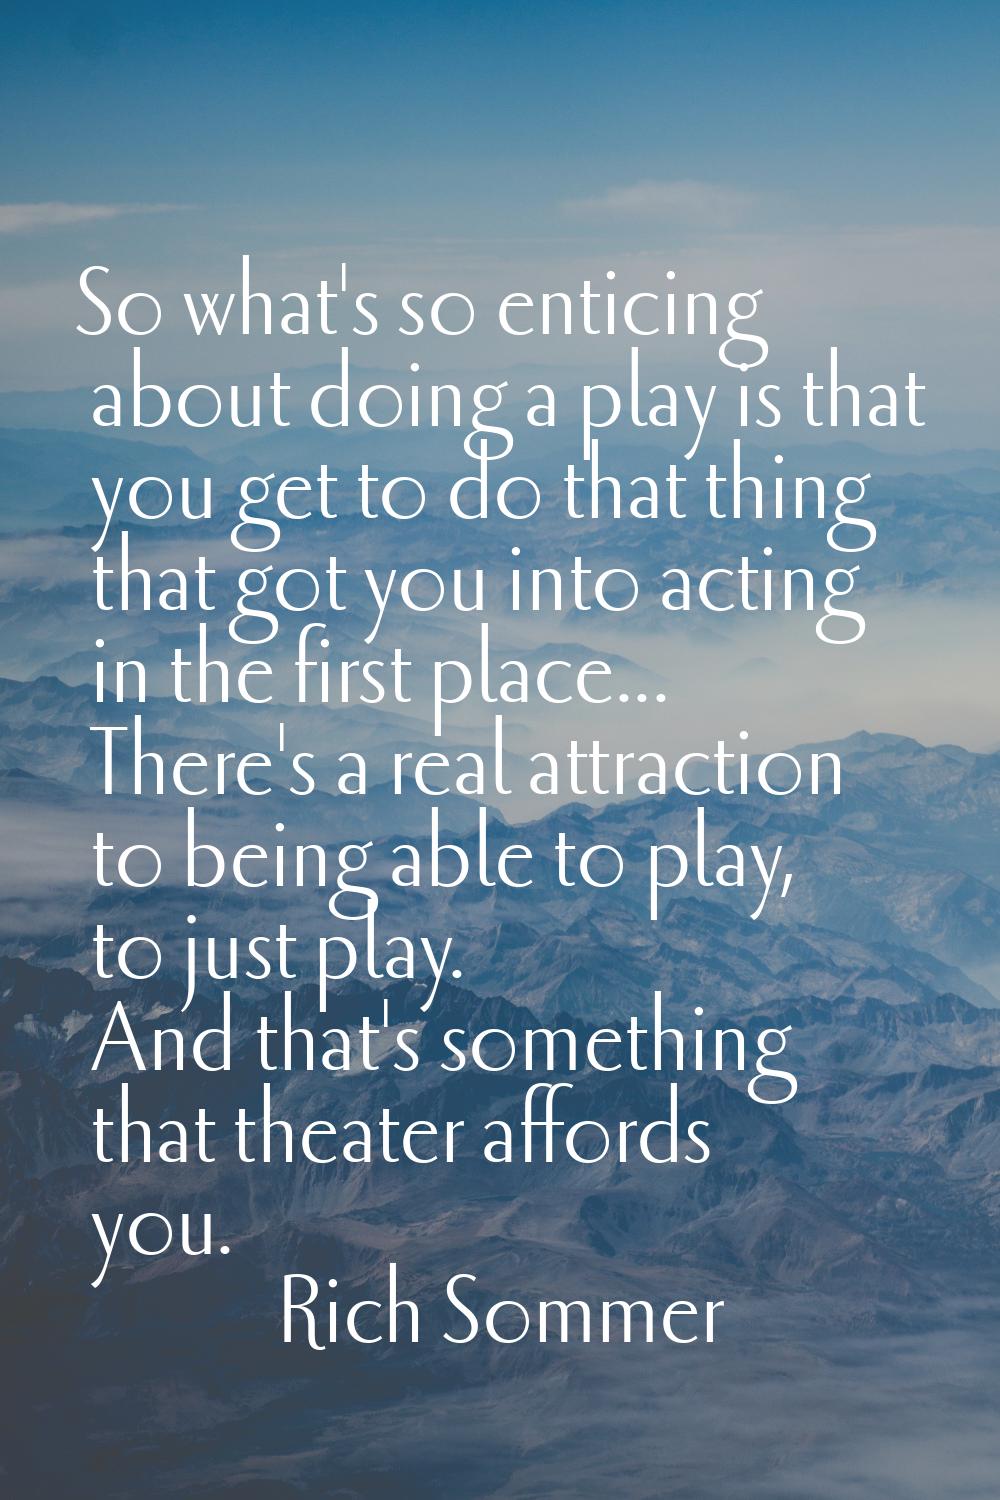 So what's so enticing about doing a play is that you get to do that thing that got you into acting 